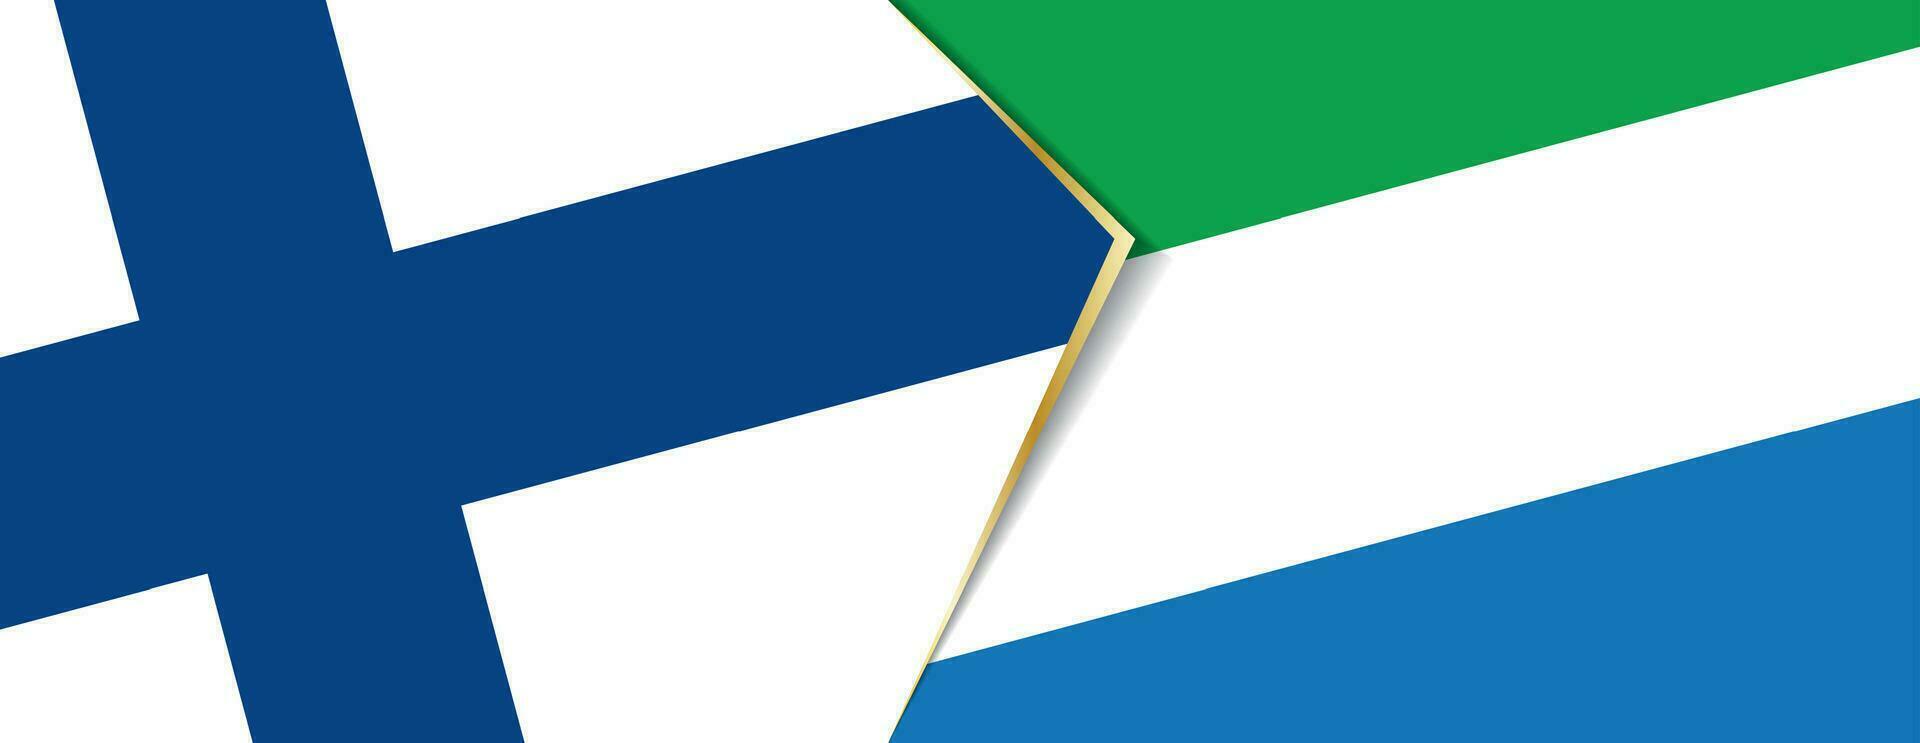 Finland and Sierra Leone flags, two vector flags.